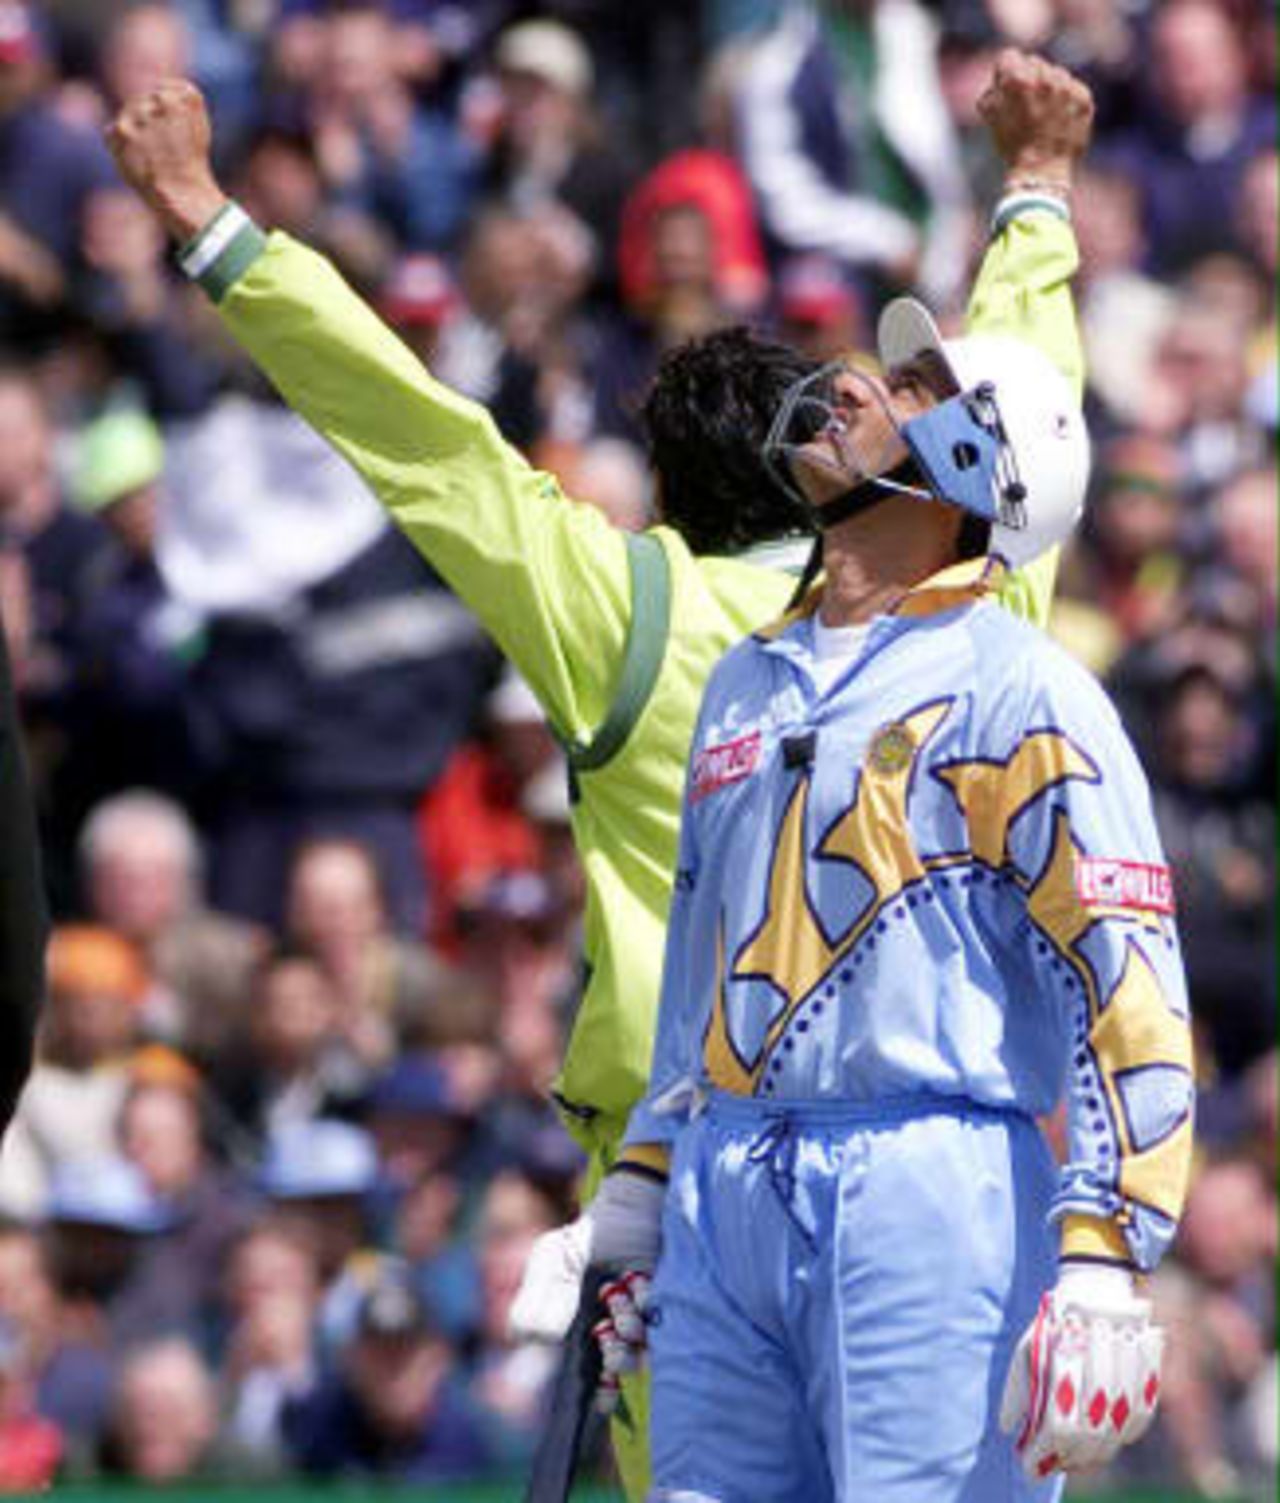 Wasim Akram holds up his hands as India's Mohammad Azharuddin looks at the sky as India lost another wicket  08 June 99, during their Cricket World Cup match at Old Trafford, Manchester